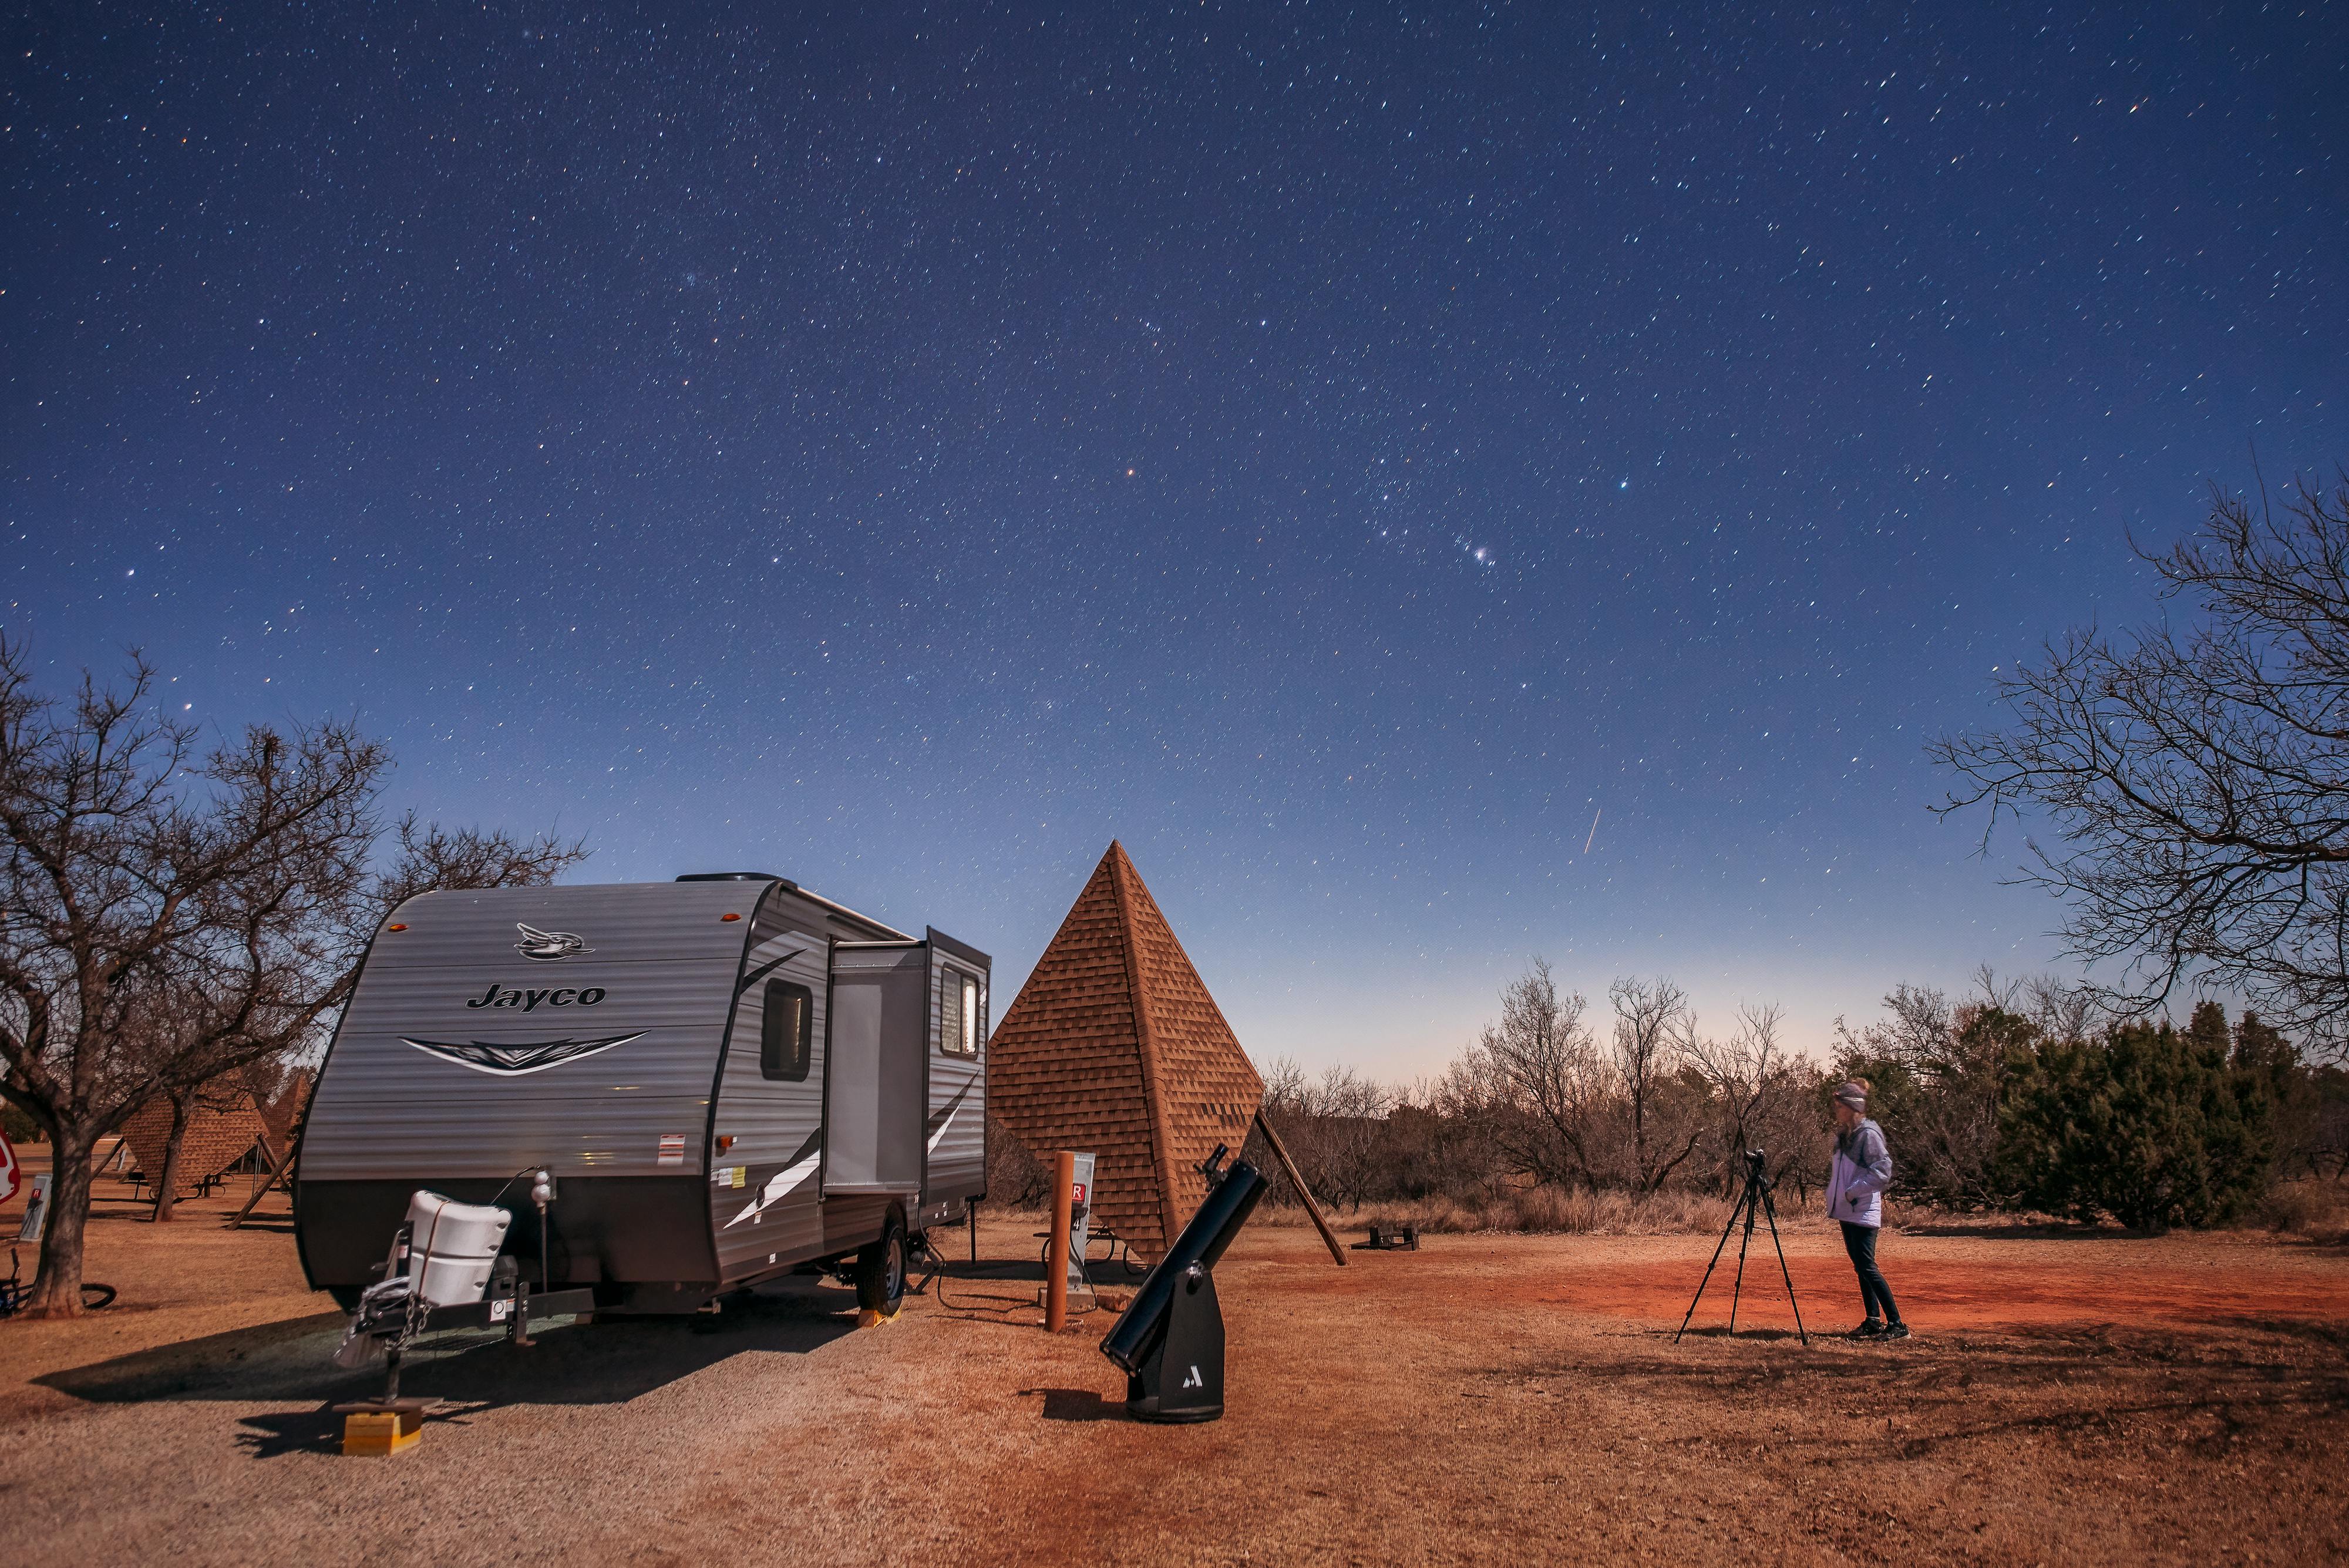 Alison Takacs sets up a shot of her Jayco RV and the night sky